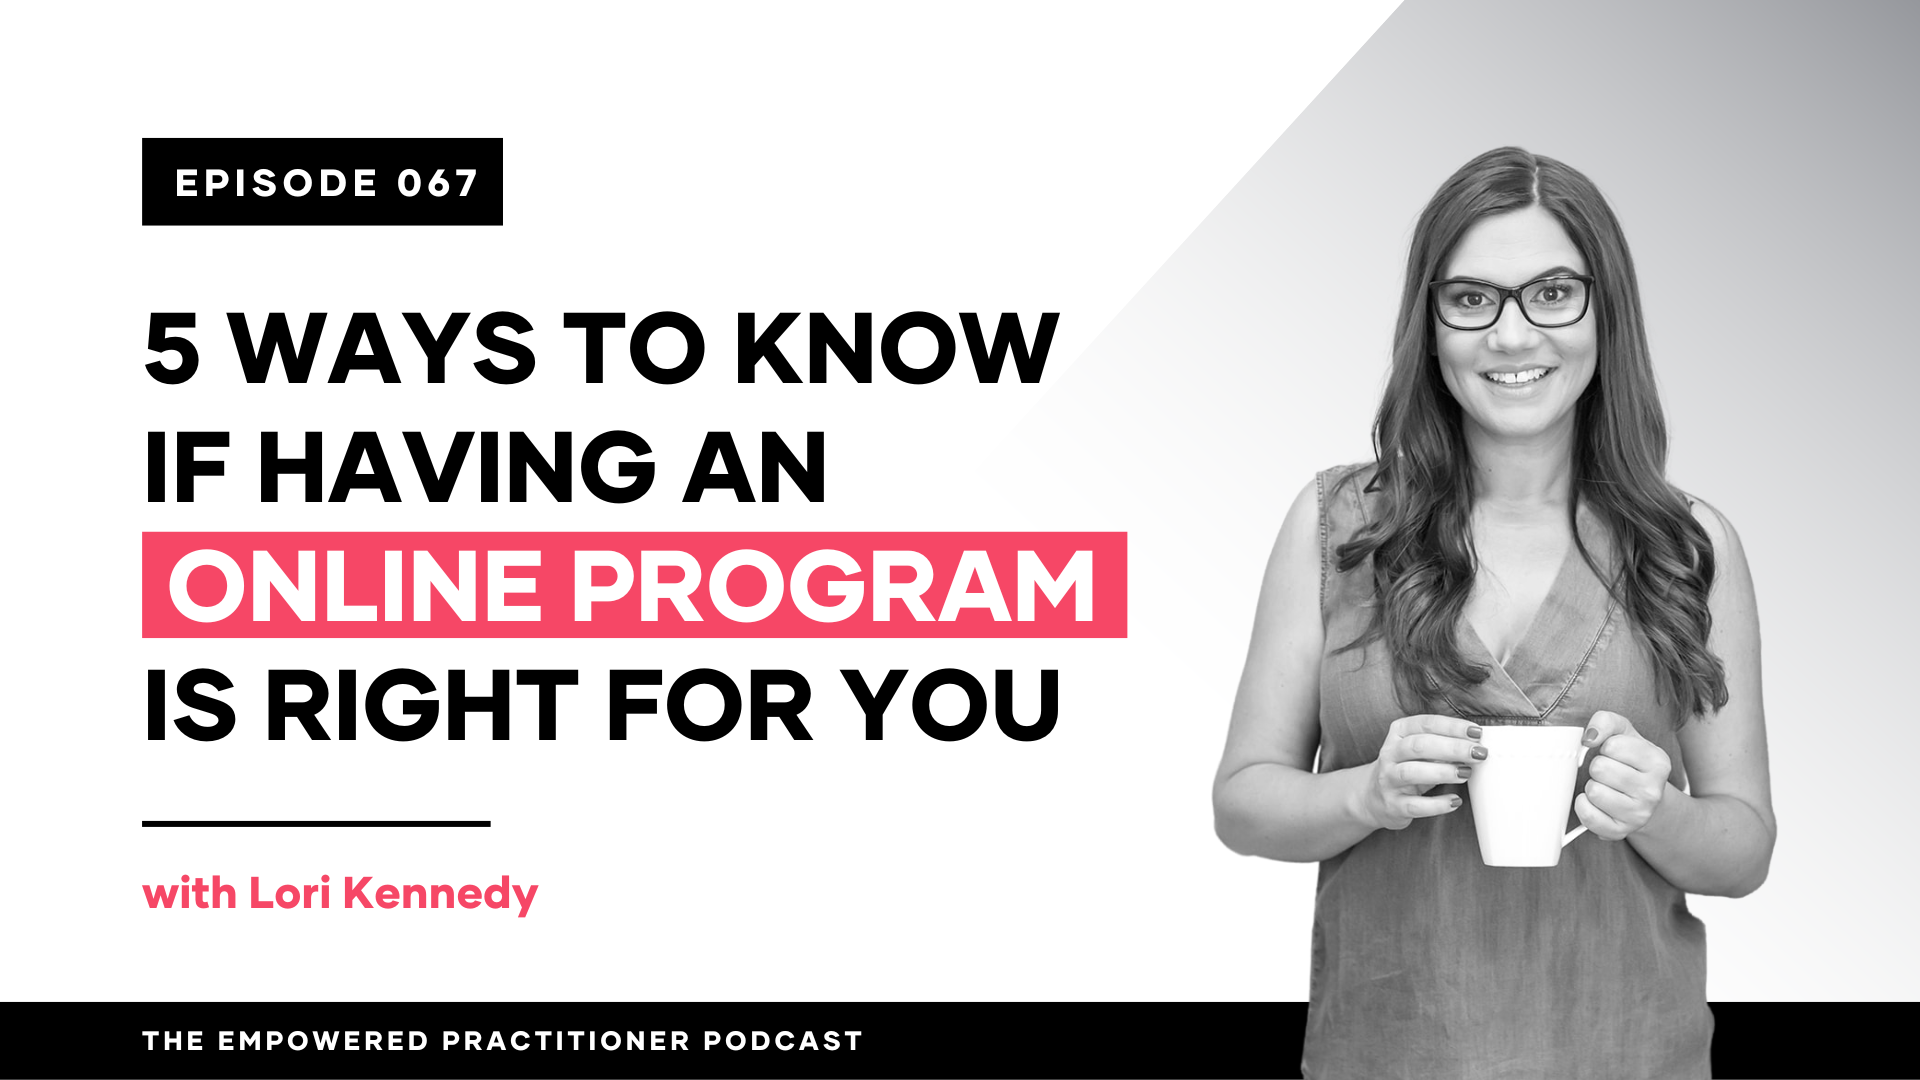 5 Ways To Know If Having An Online Program Is Right For You